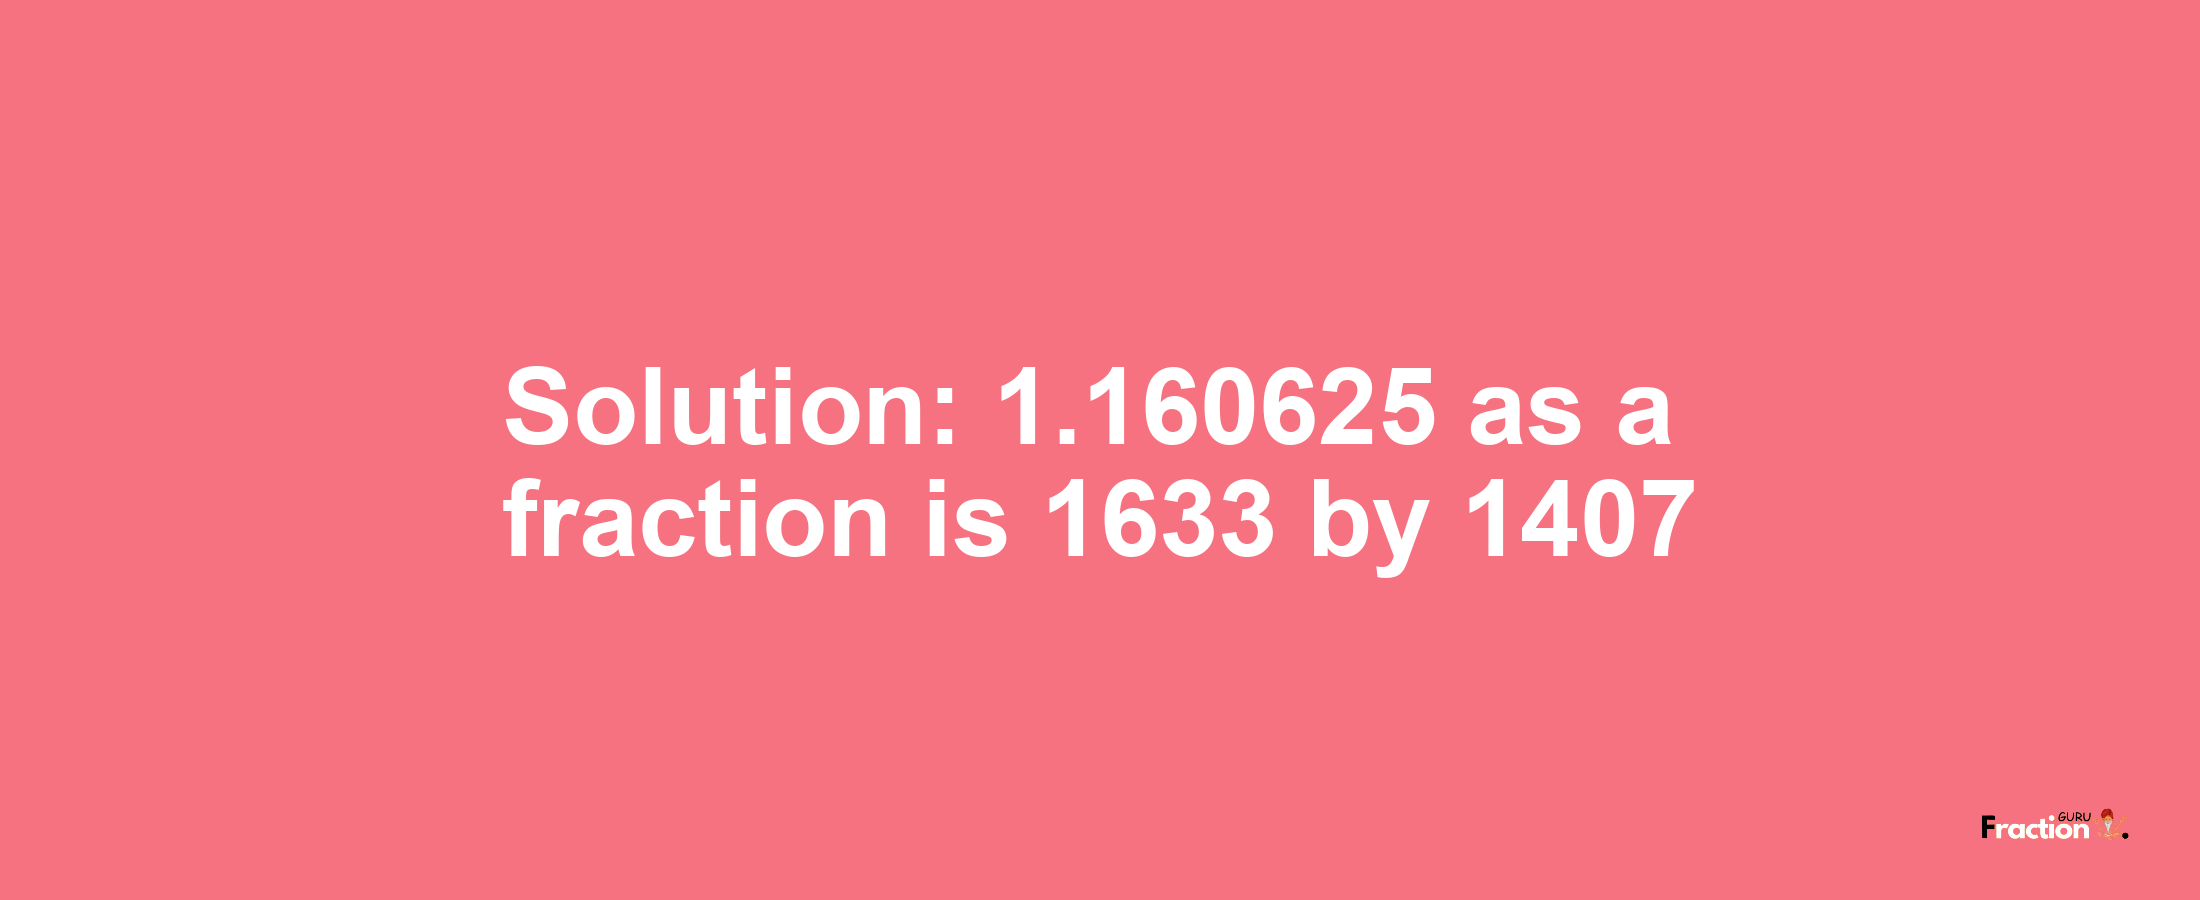 Solution:1.160625 as a fraction is 1633/1407